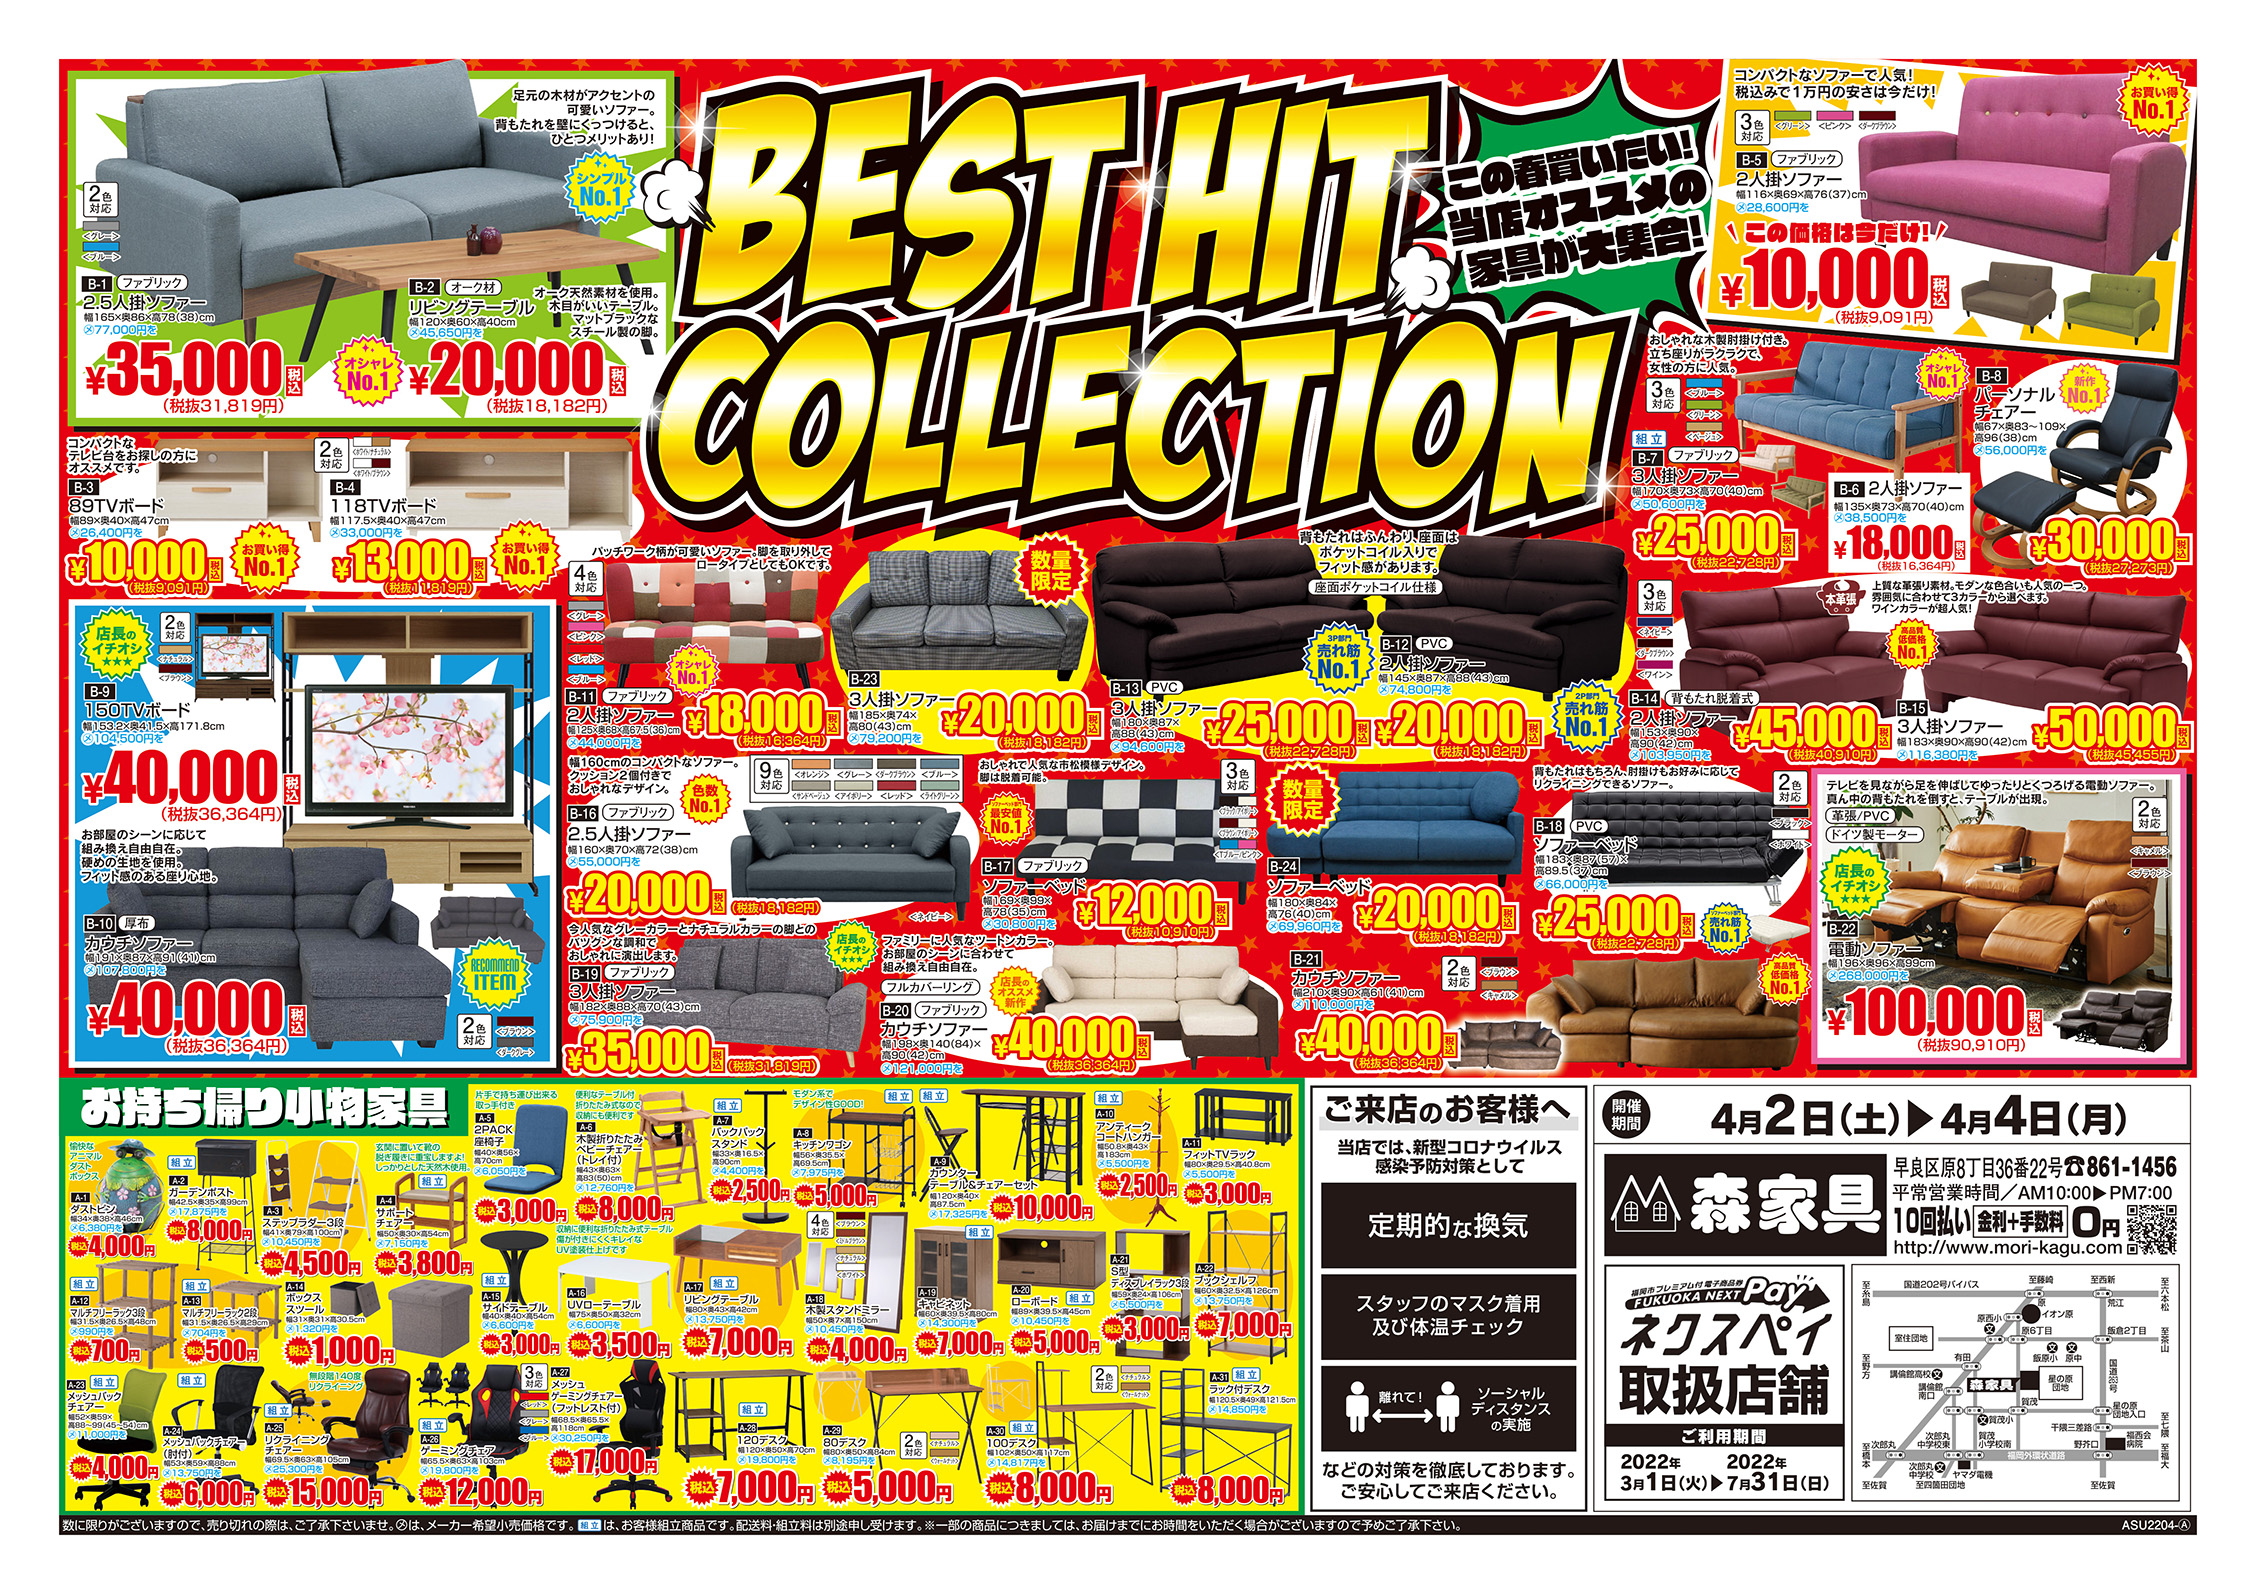 BEST HIT COLLECTION